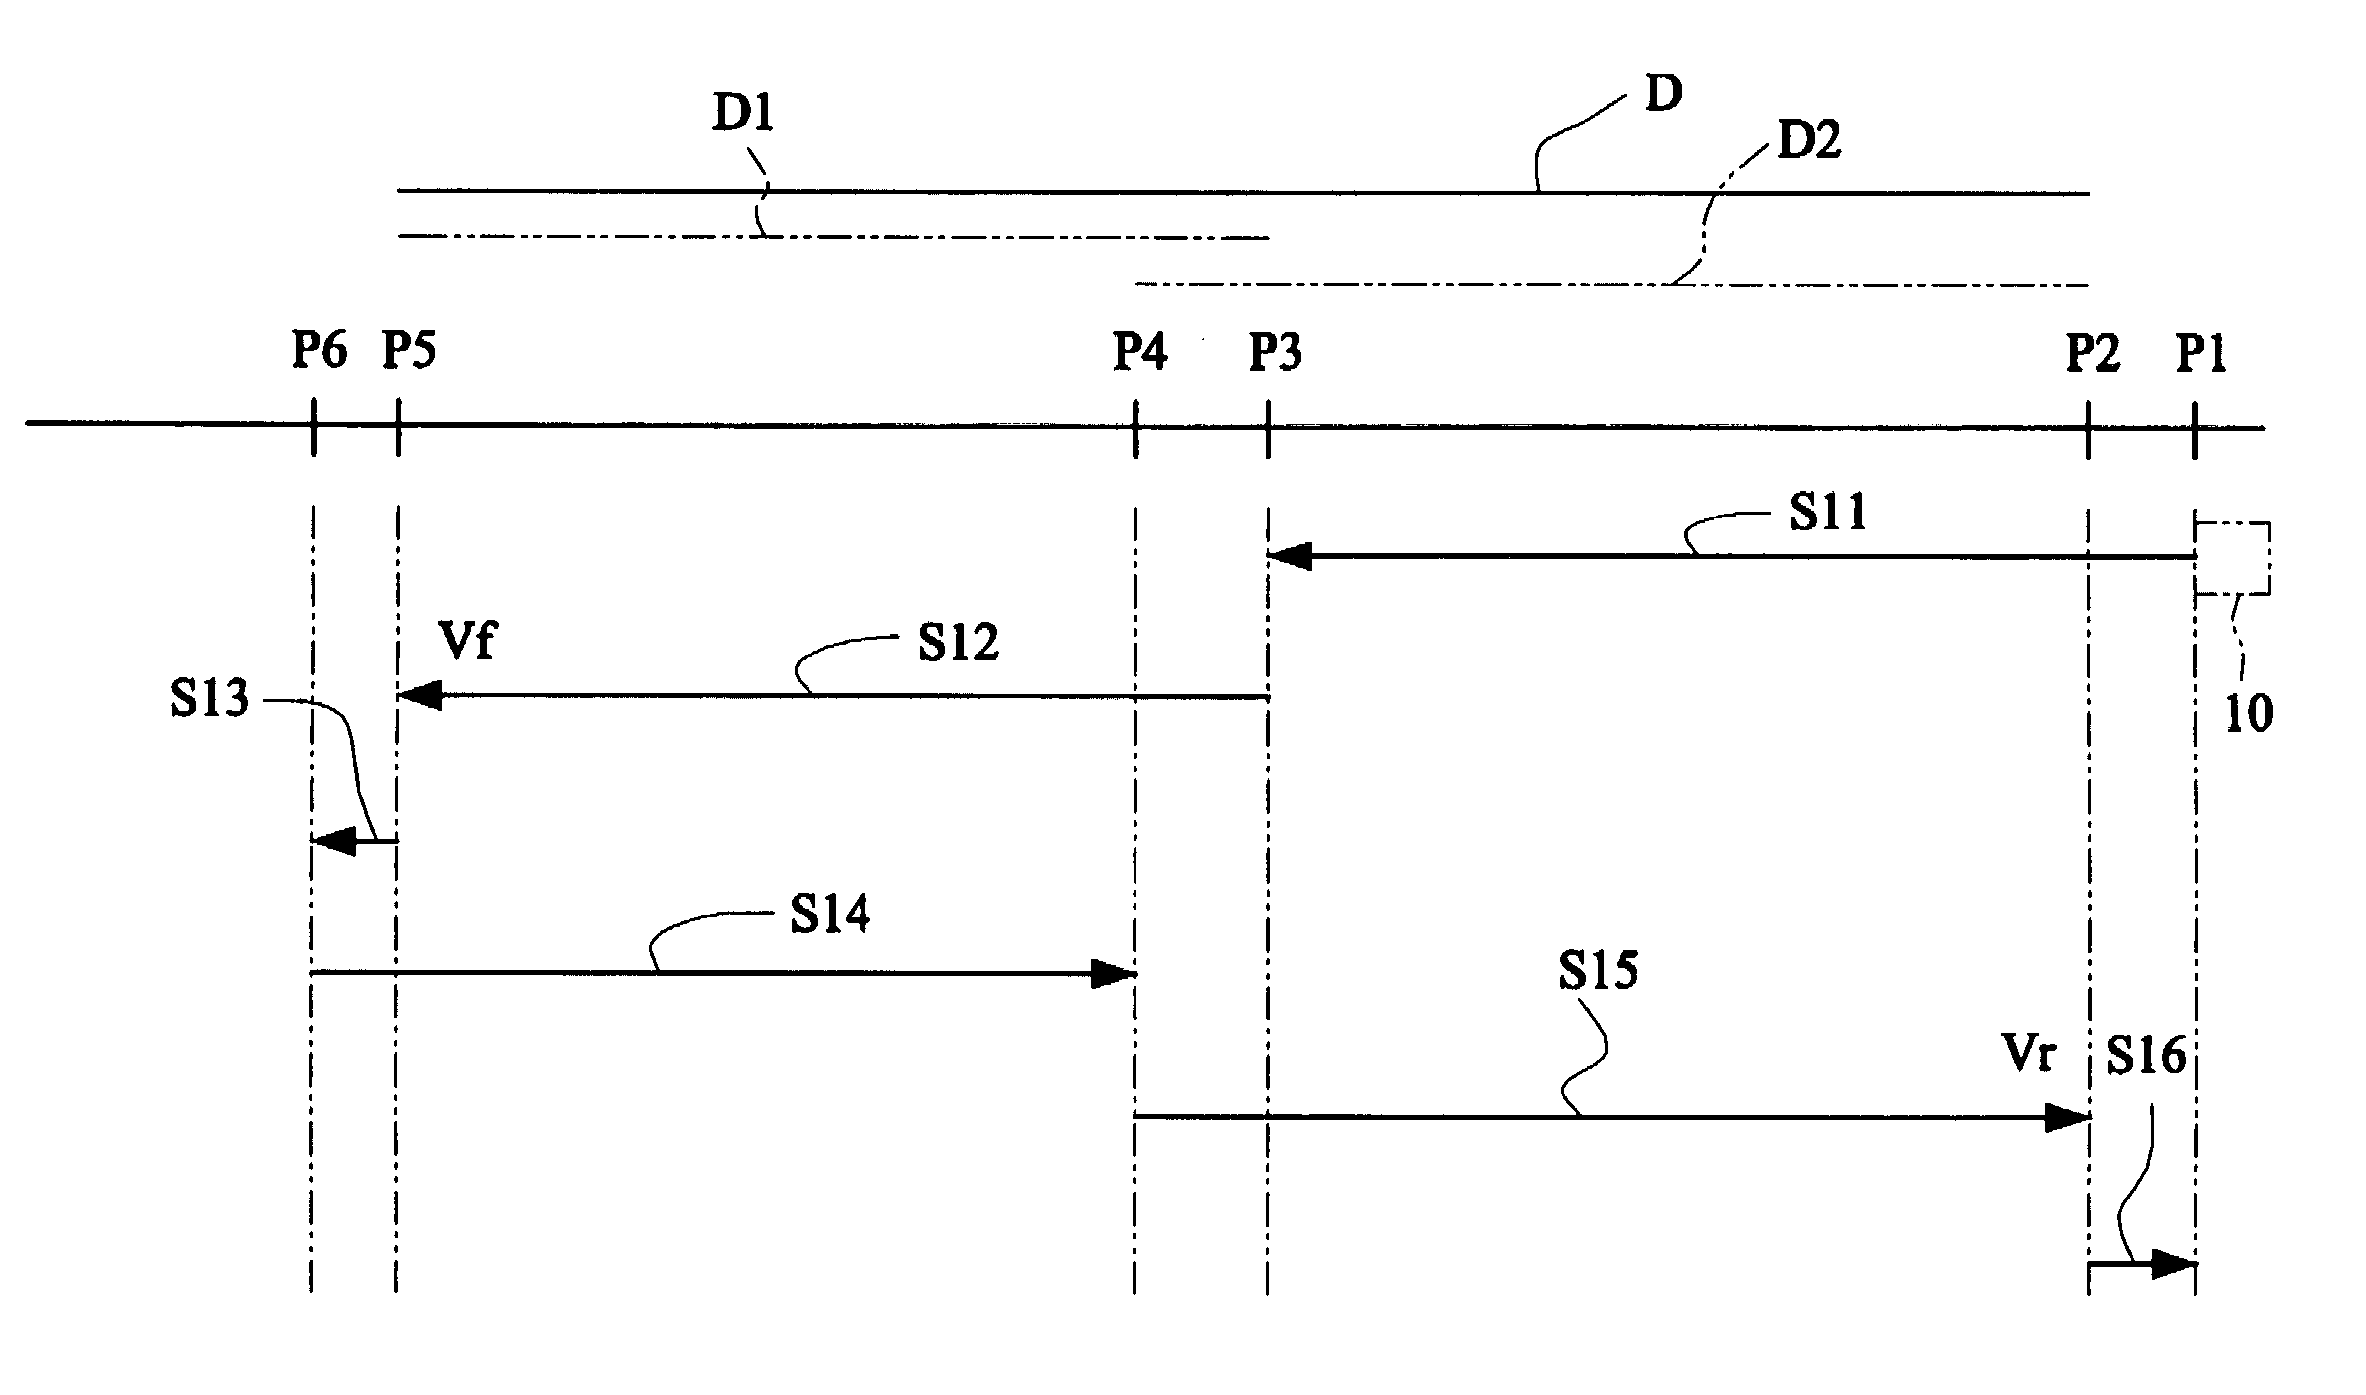 Multi-stage scanning method for increasing scanning speed and enhancing image quality